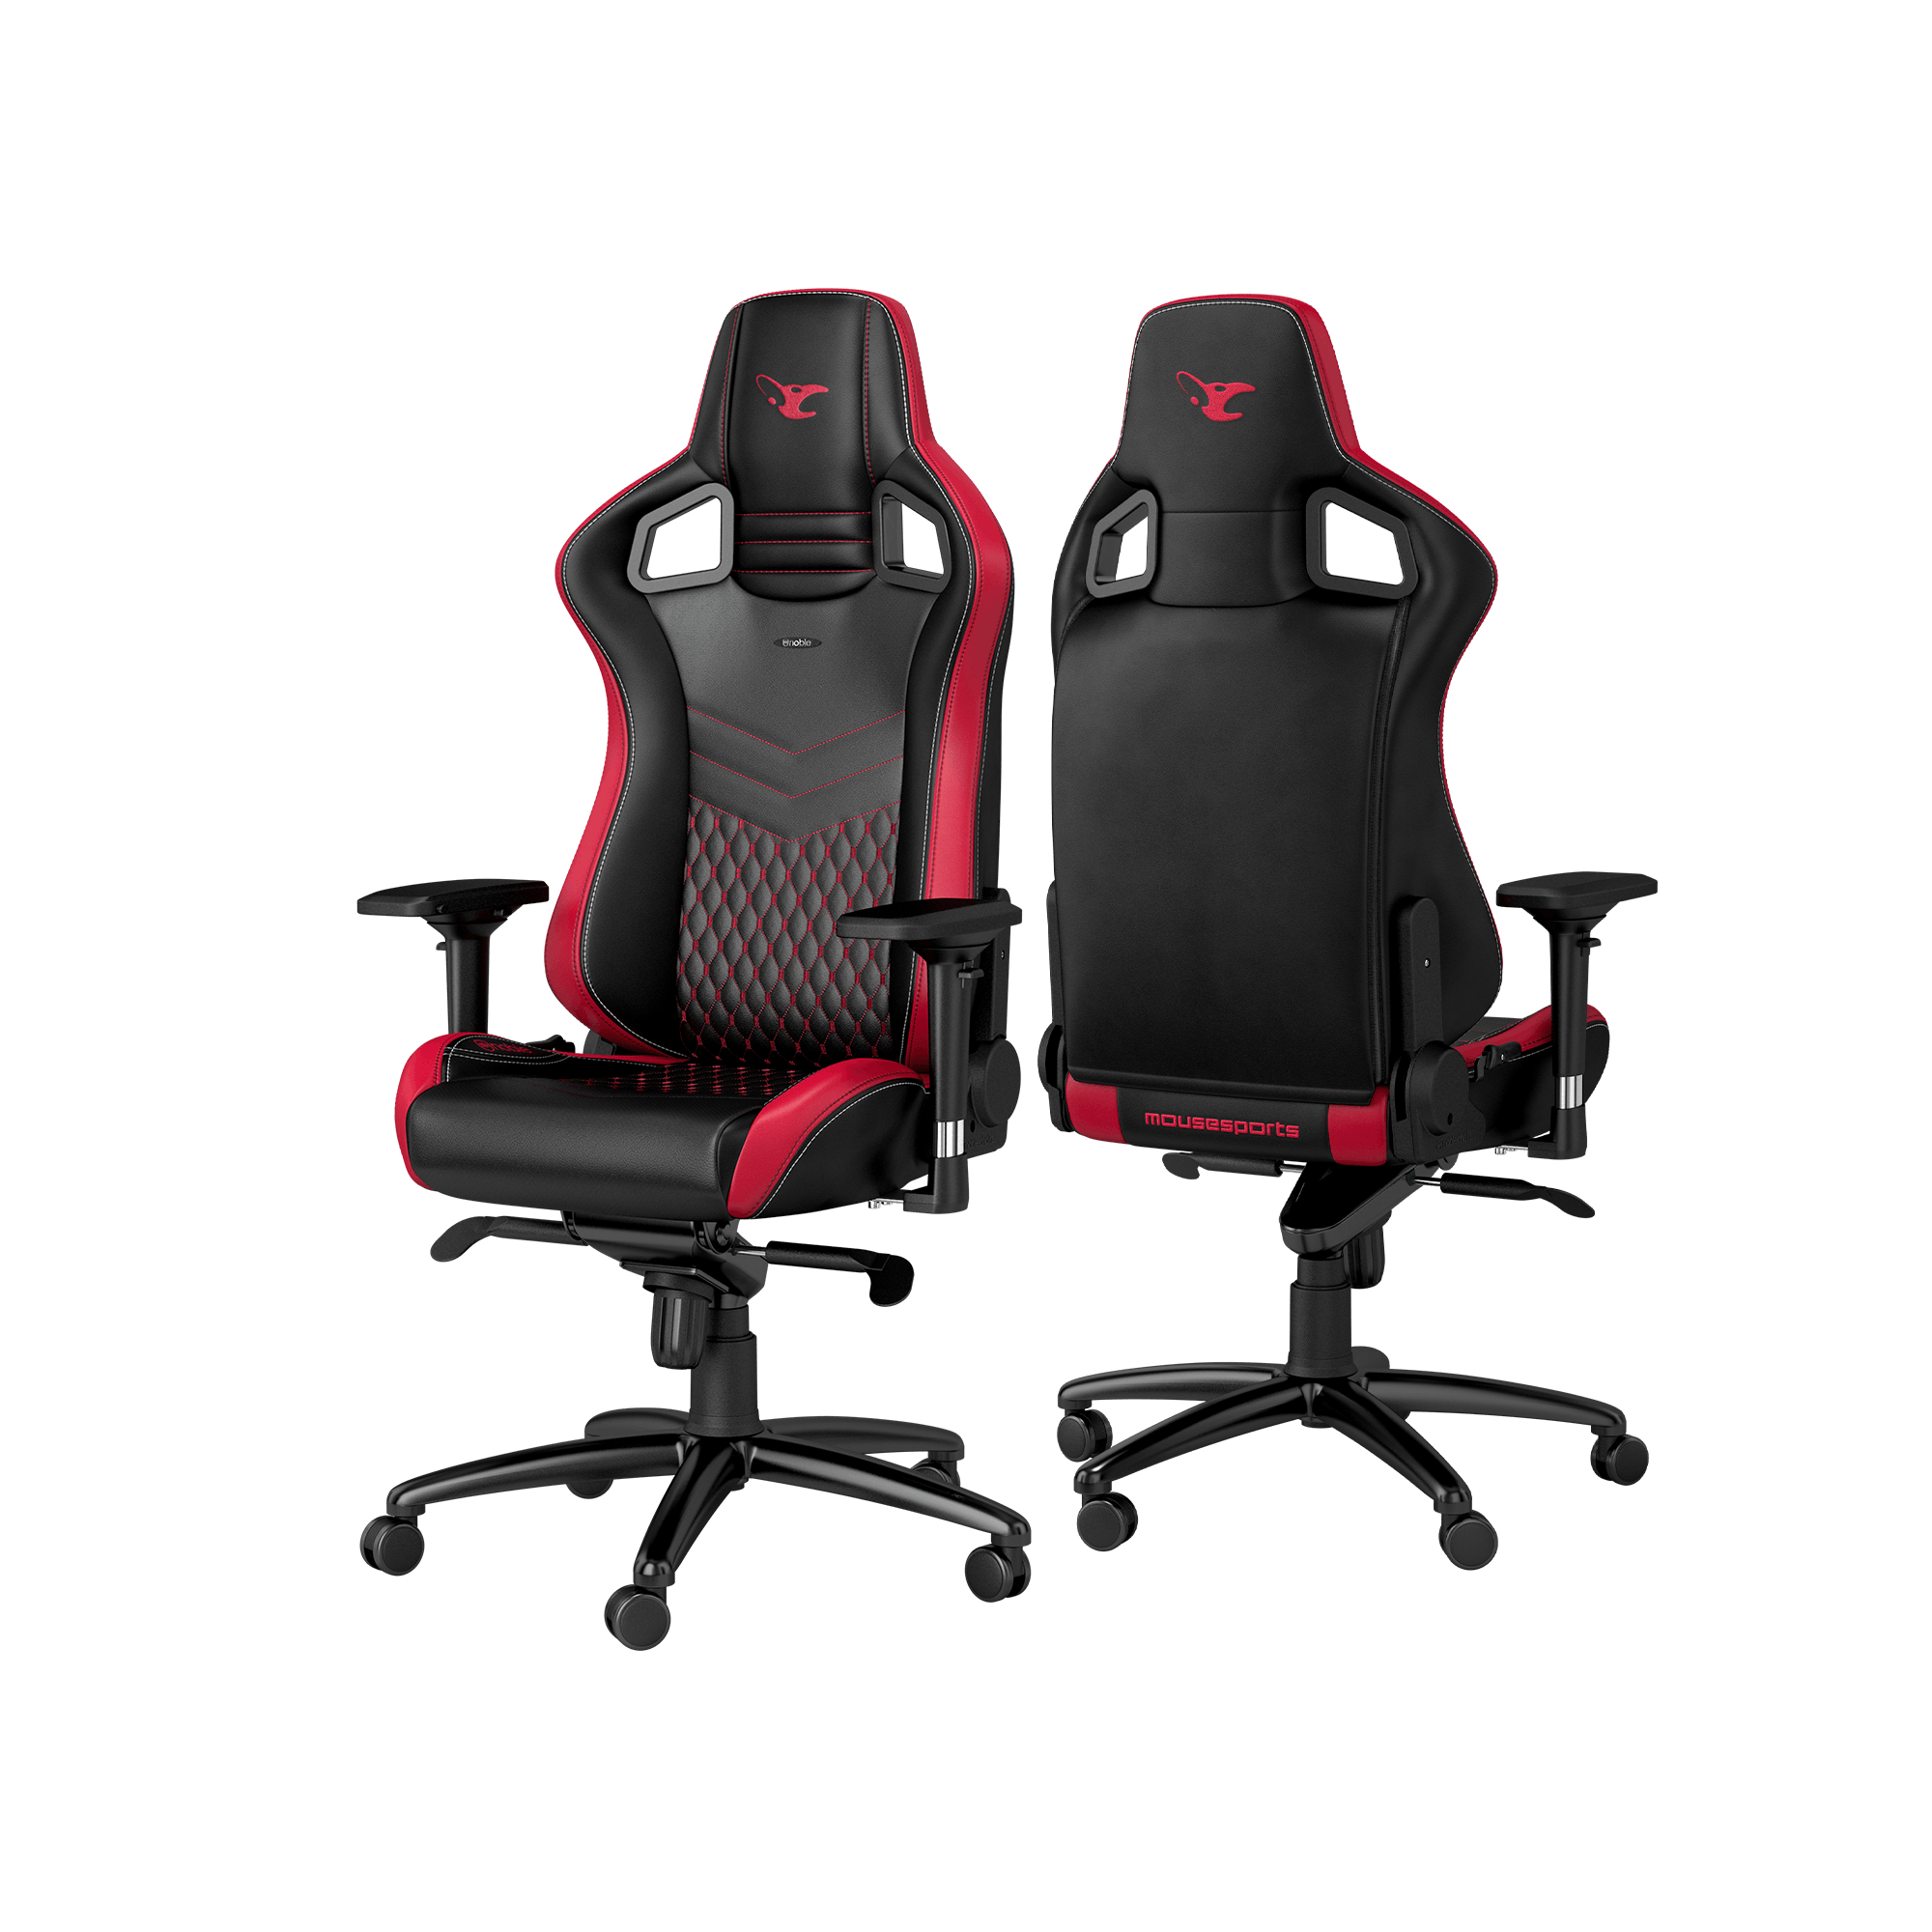 noblechairs - EPIC mousesports Edition